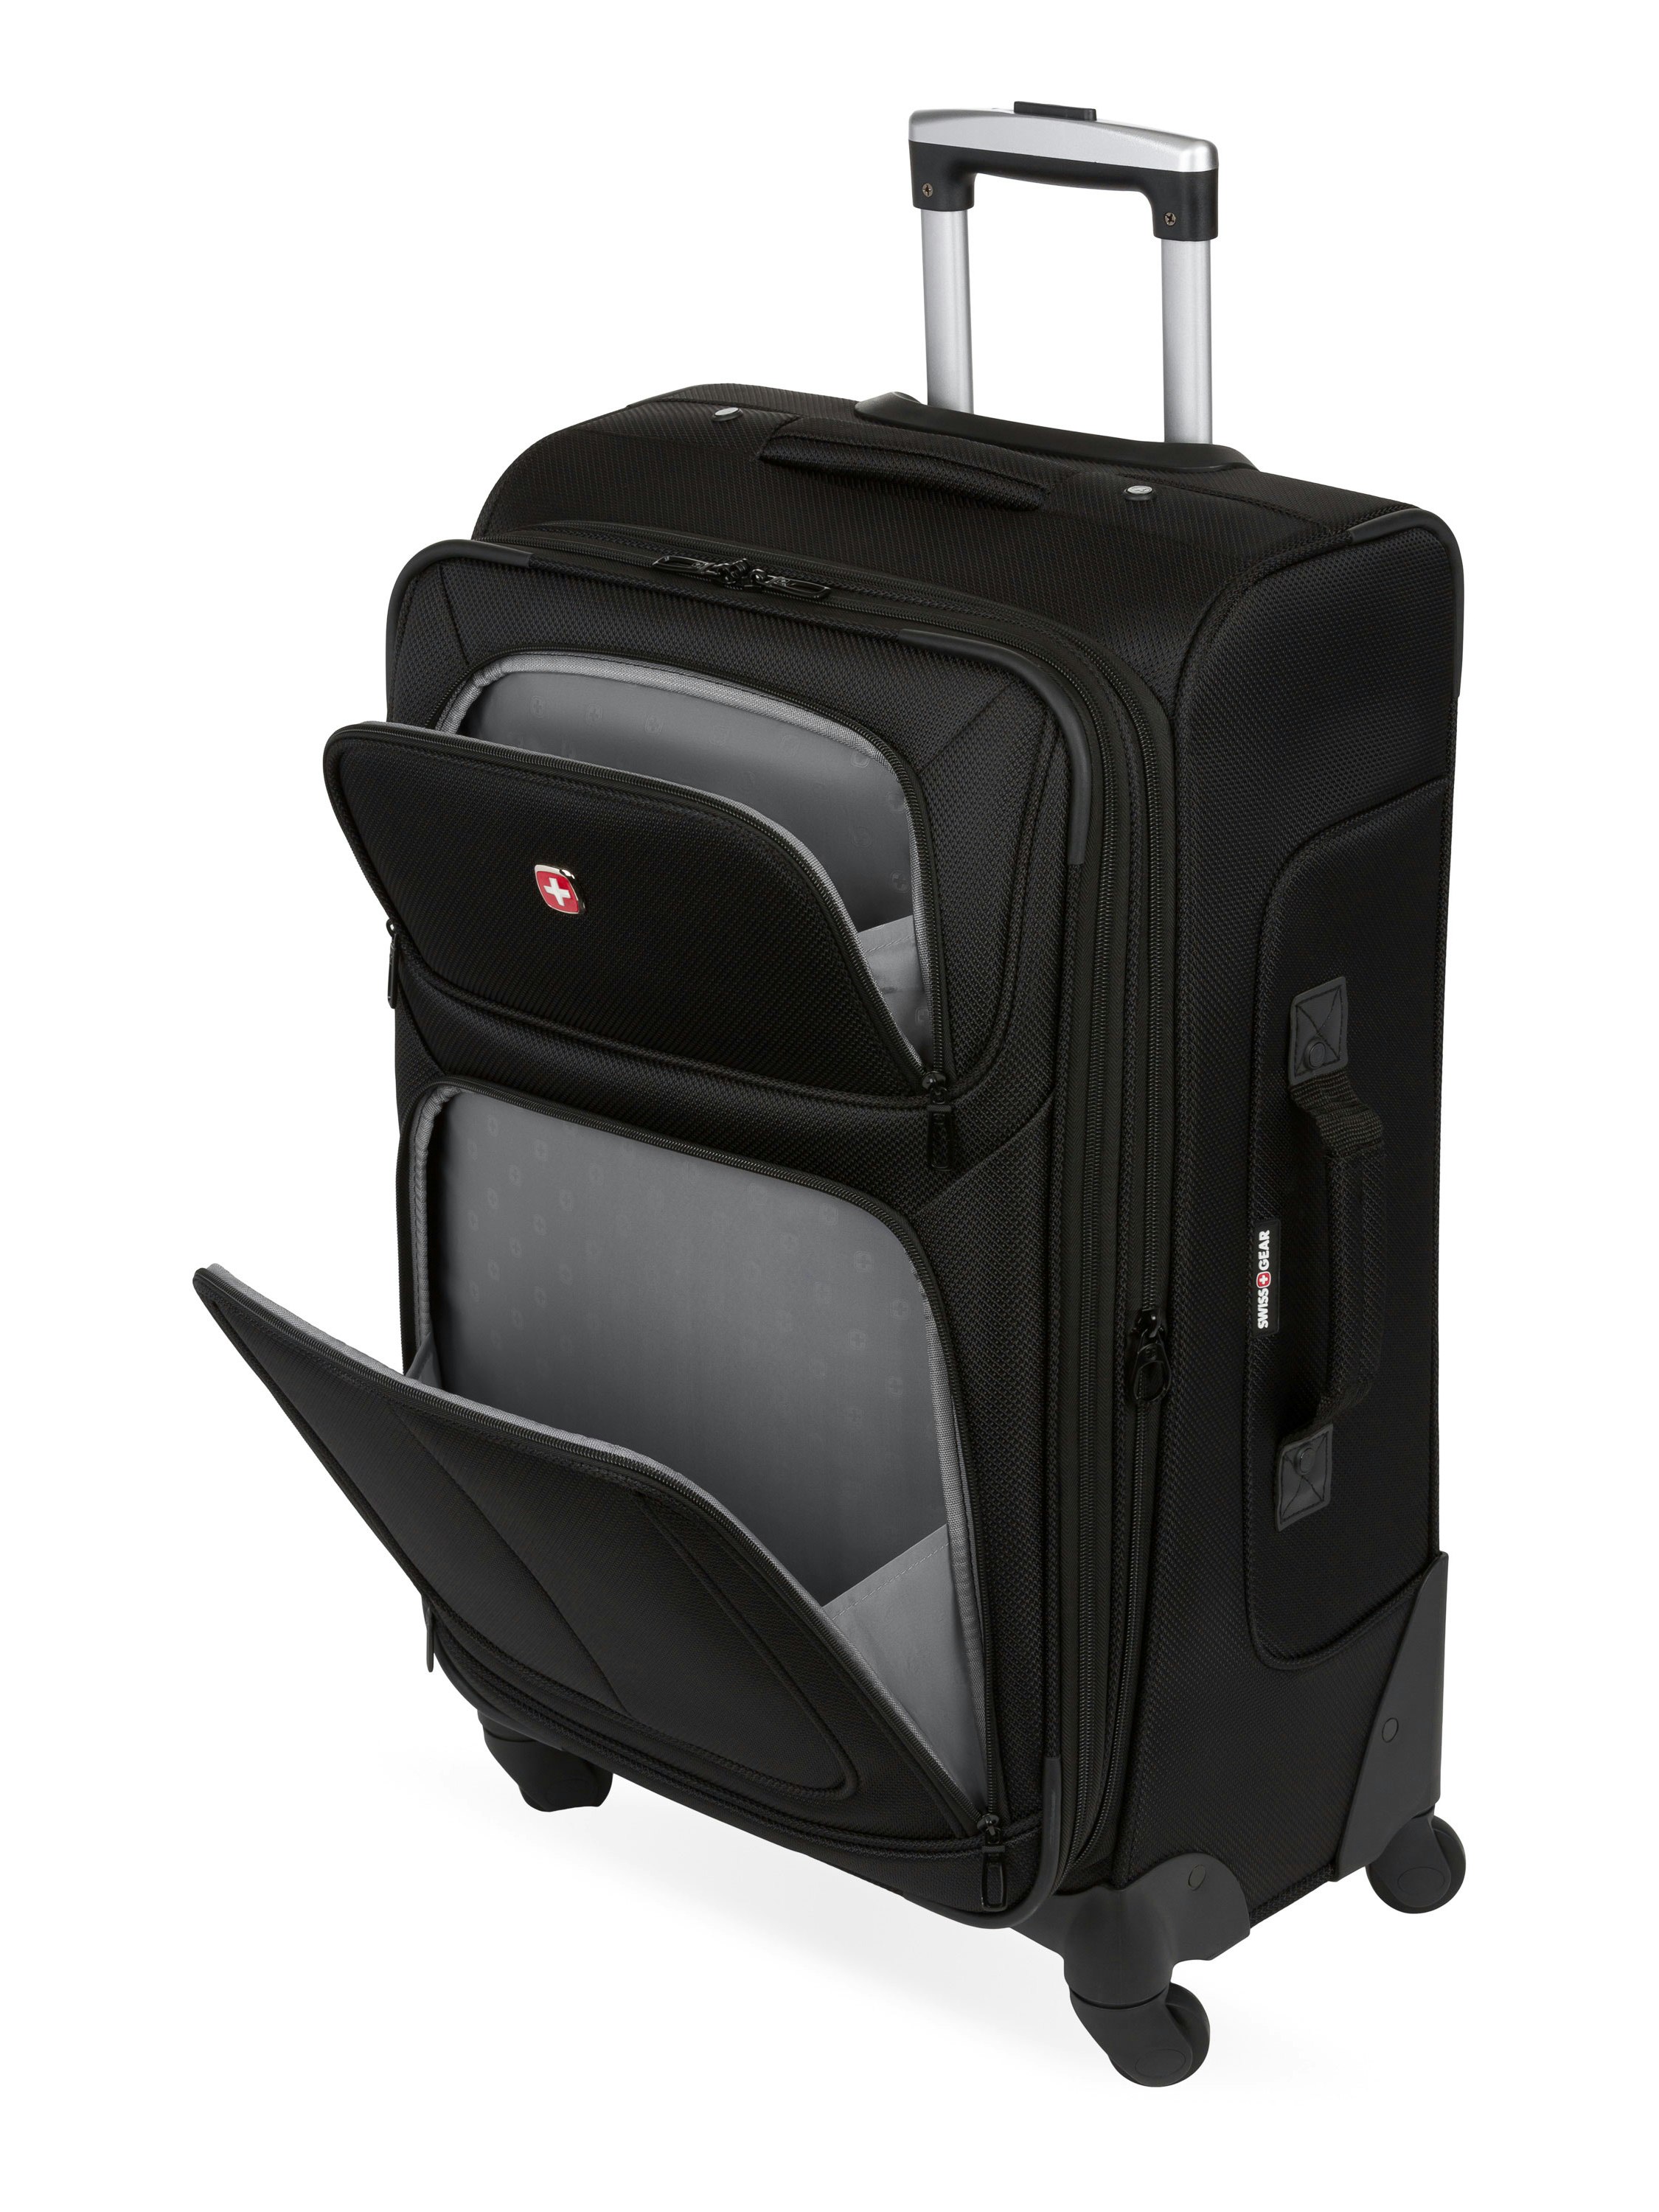 6283 Expandable Luggage with side carry handle